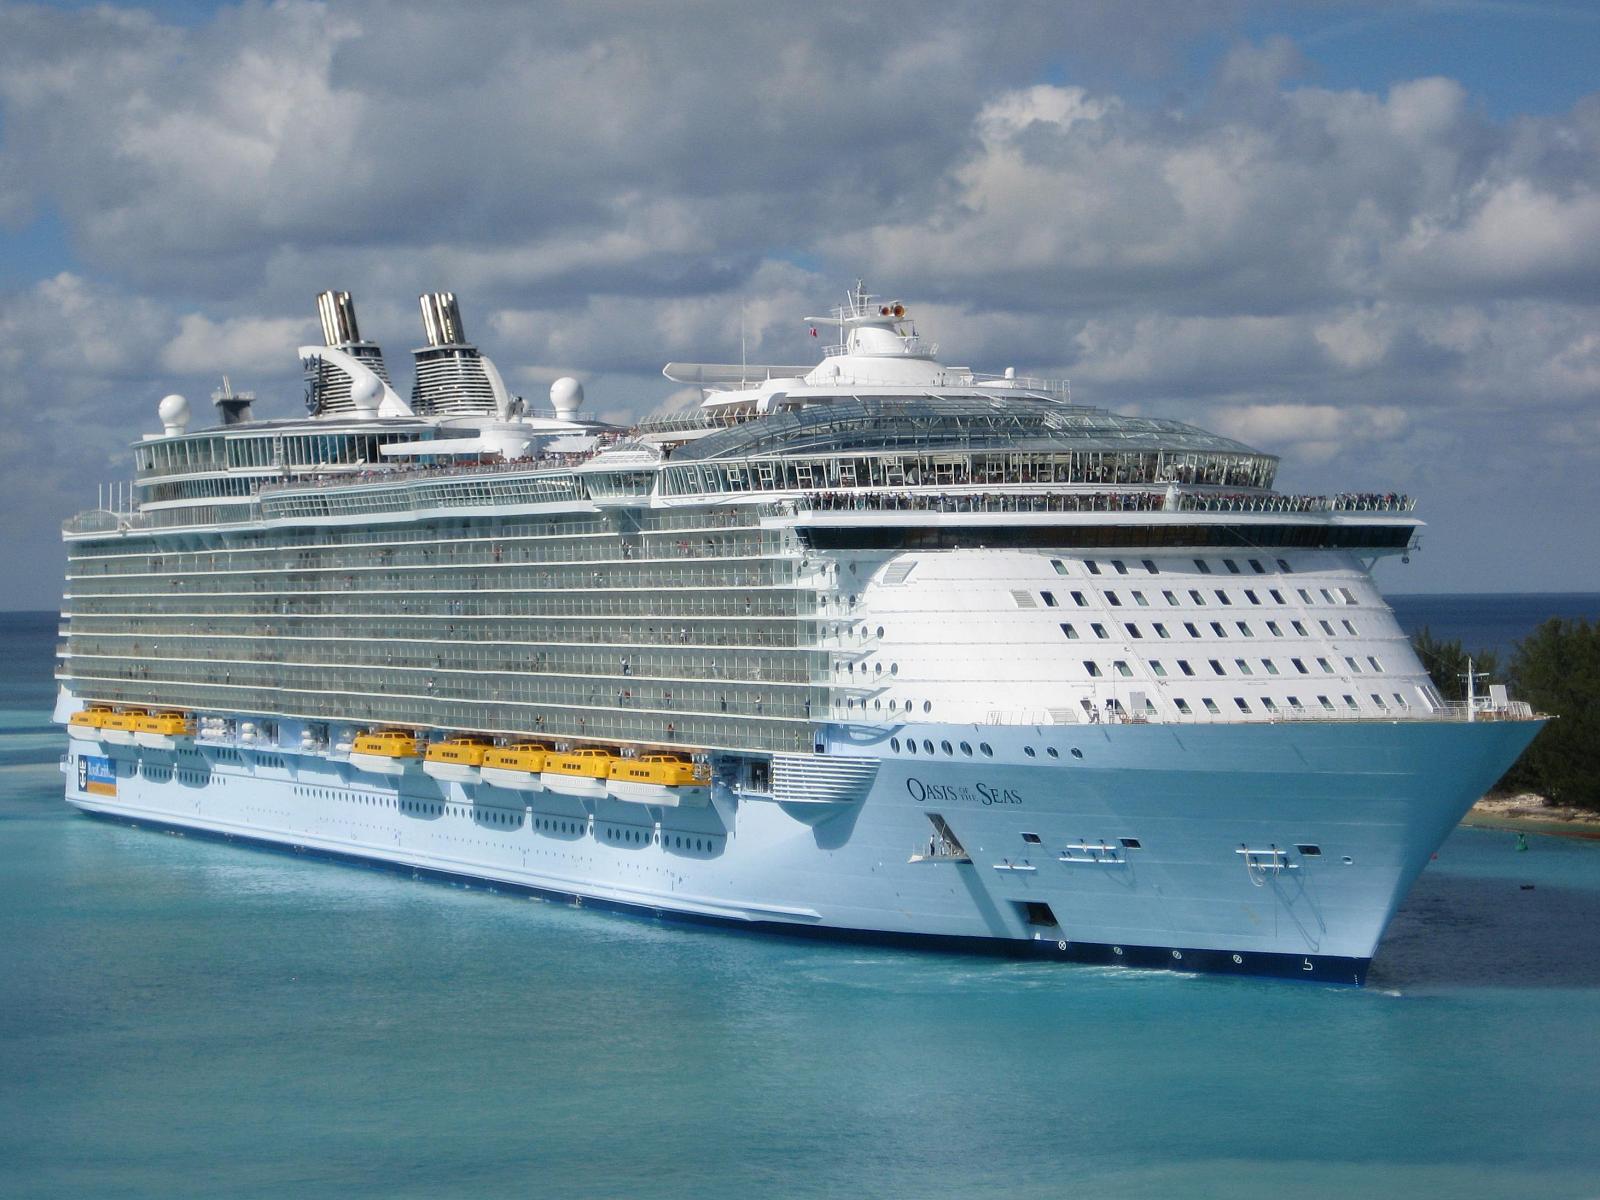 Get a Great Deal on your next CRUISE